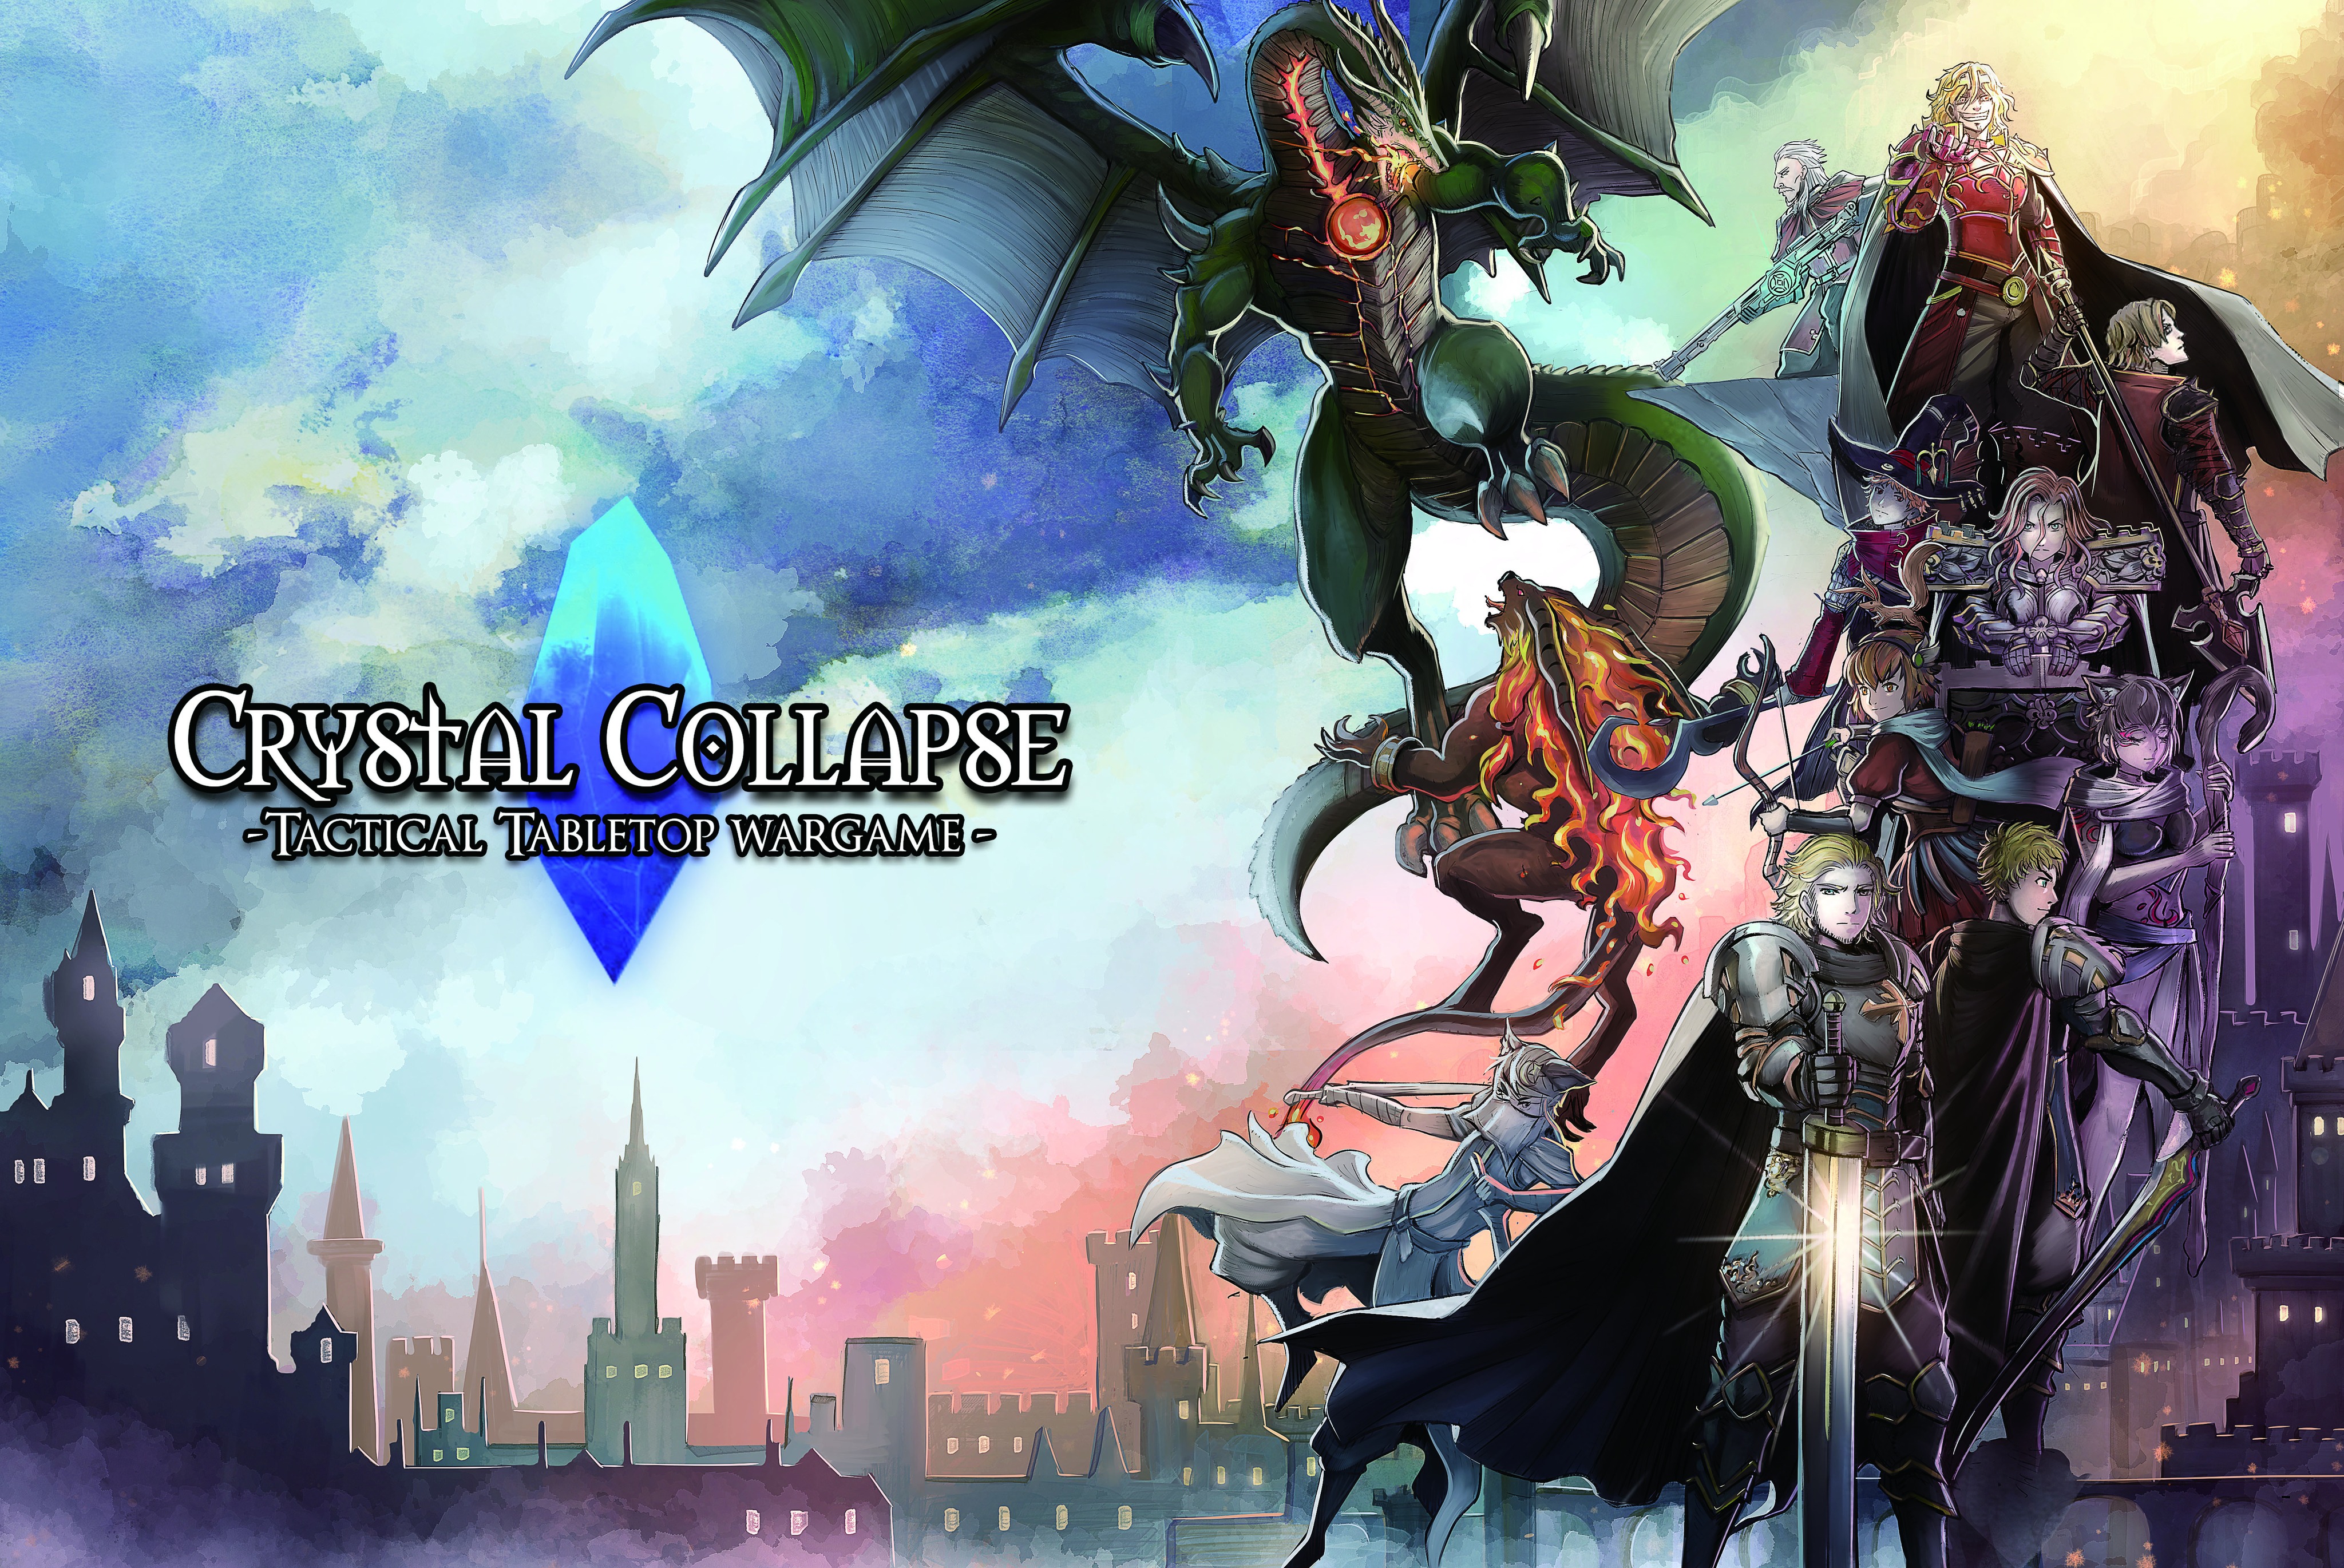 Crystal Collapse Cover art with character collage featuring Ifrit and Bahamut